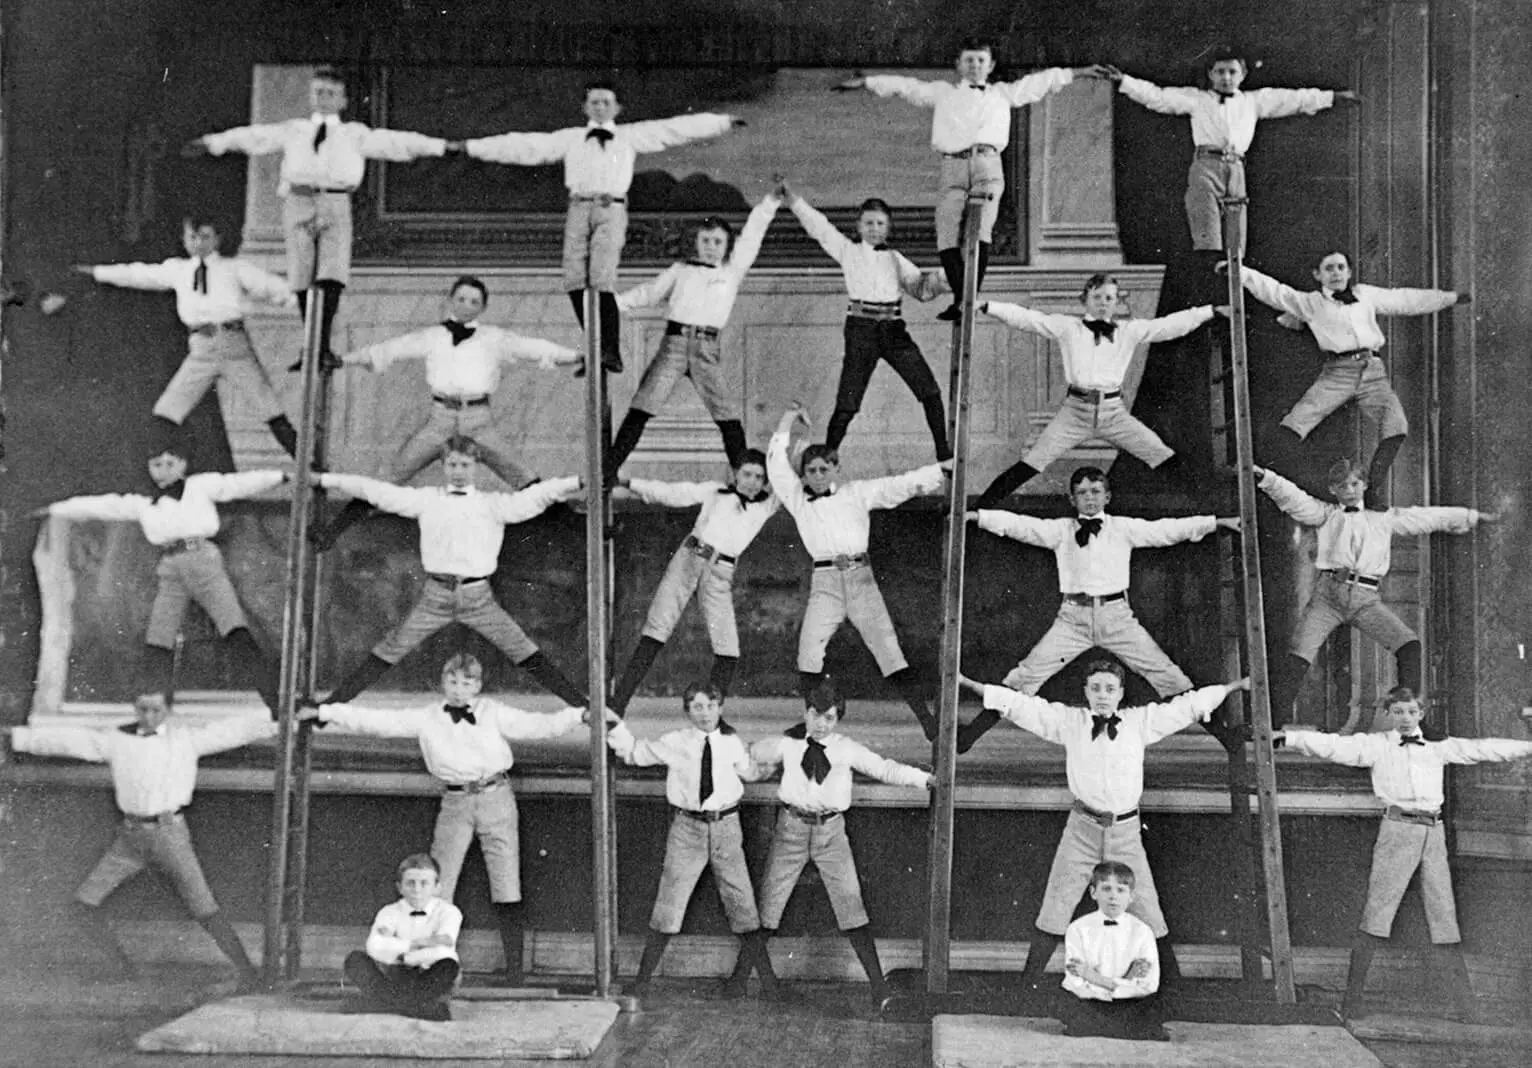 24 boys are shown, balancing on top of one another and on ladders. They form groups of three on either side of the ladders, and each of the four ladders has one boy perched on top. Two boys sit on the ground in front of the scene.